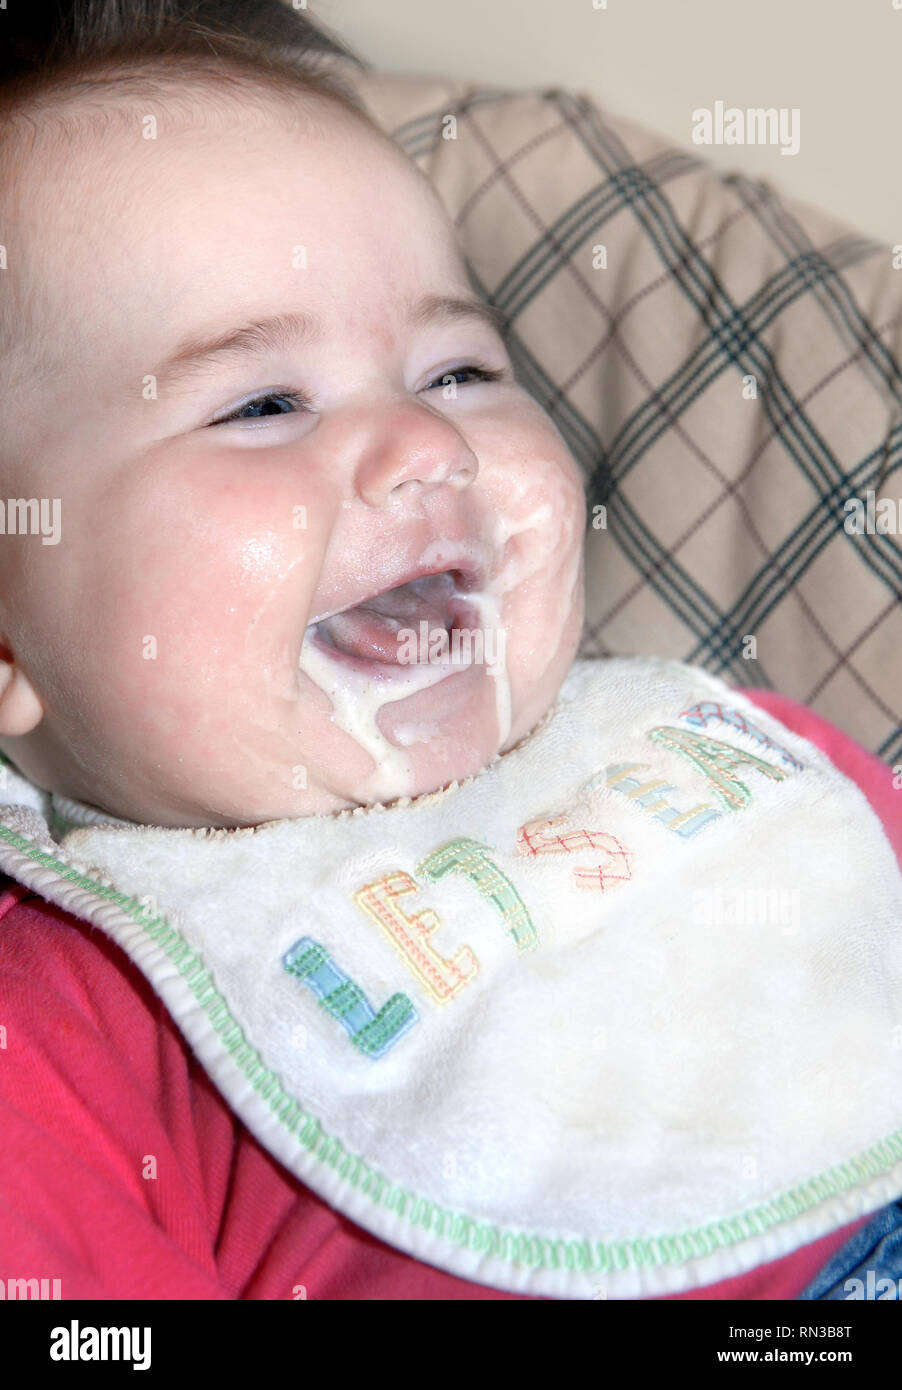 Baby girl, despite having taken a bite of her baby food, grins with every ounce of her being.  Mess ensues with liquid food everywhere. Stock Photo